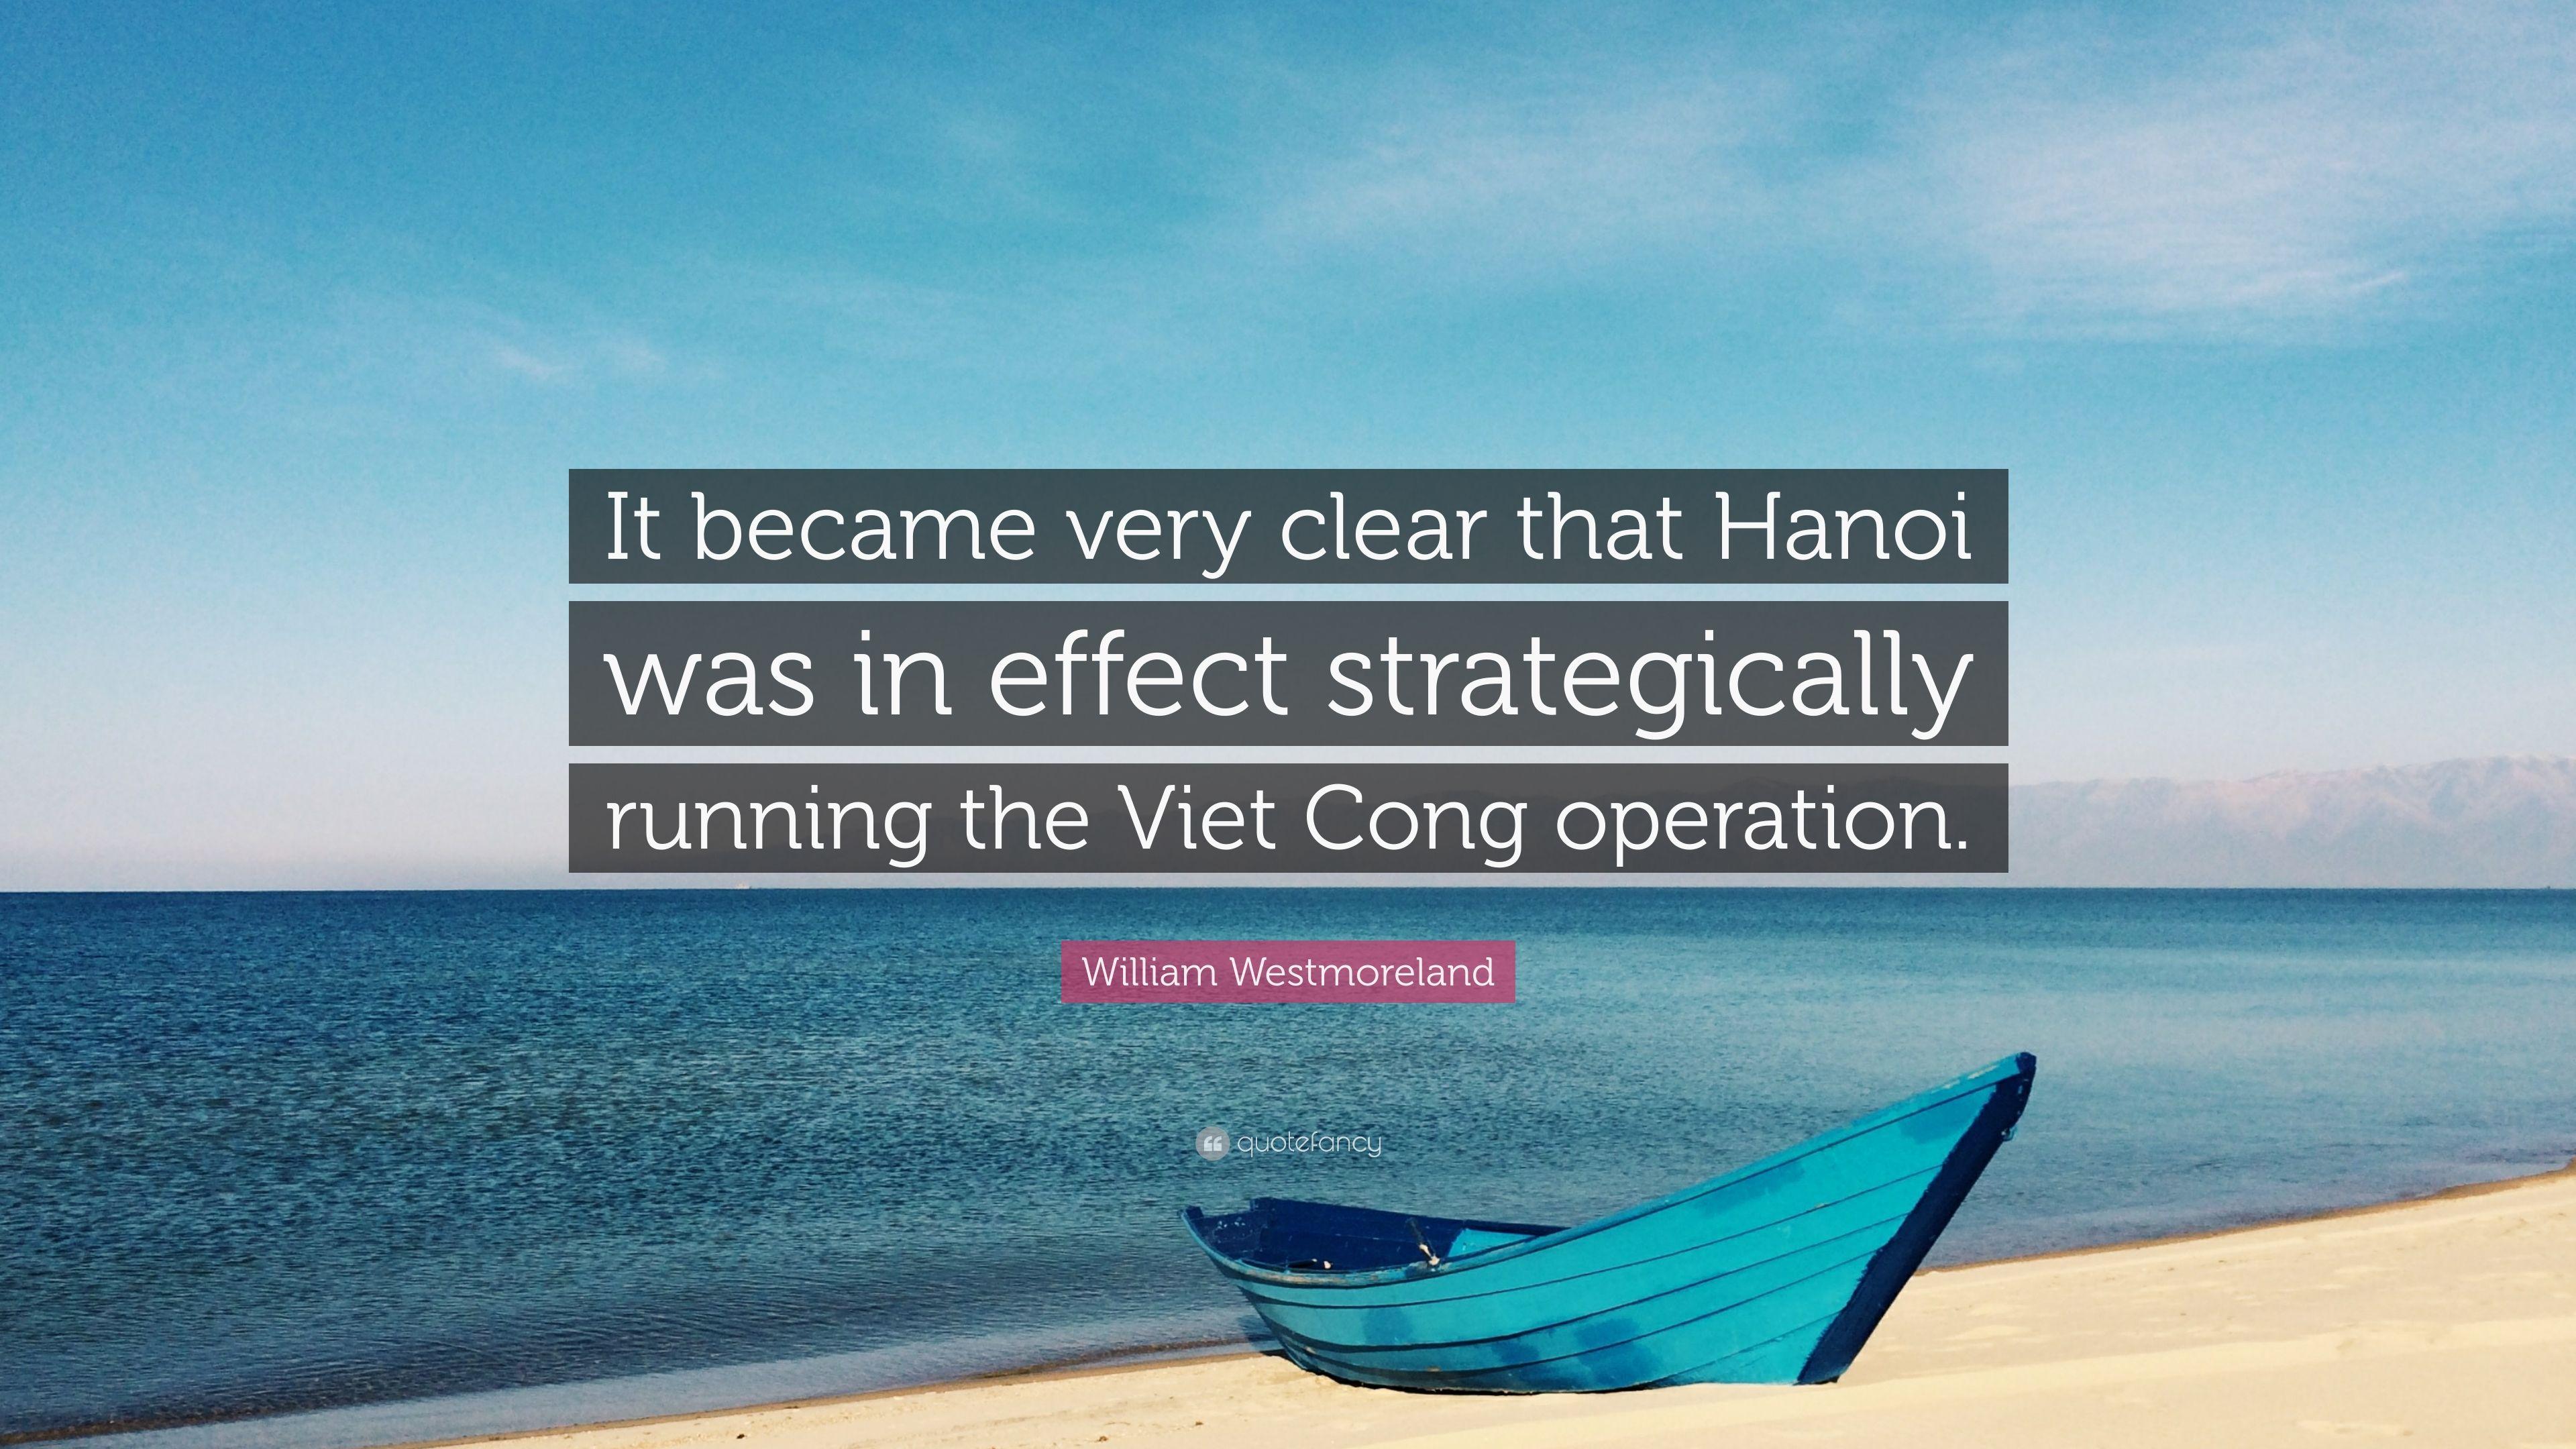 William Westmoreland Quote: “It became very clear that Hanoi was